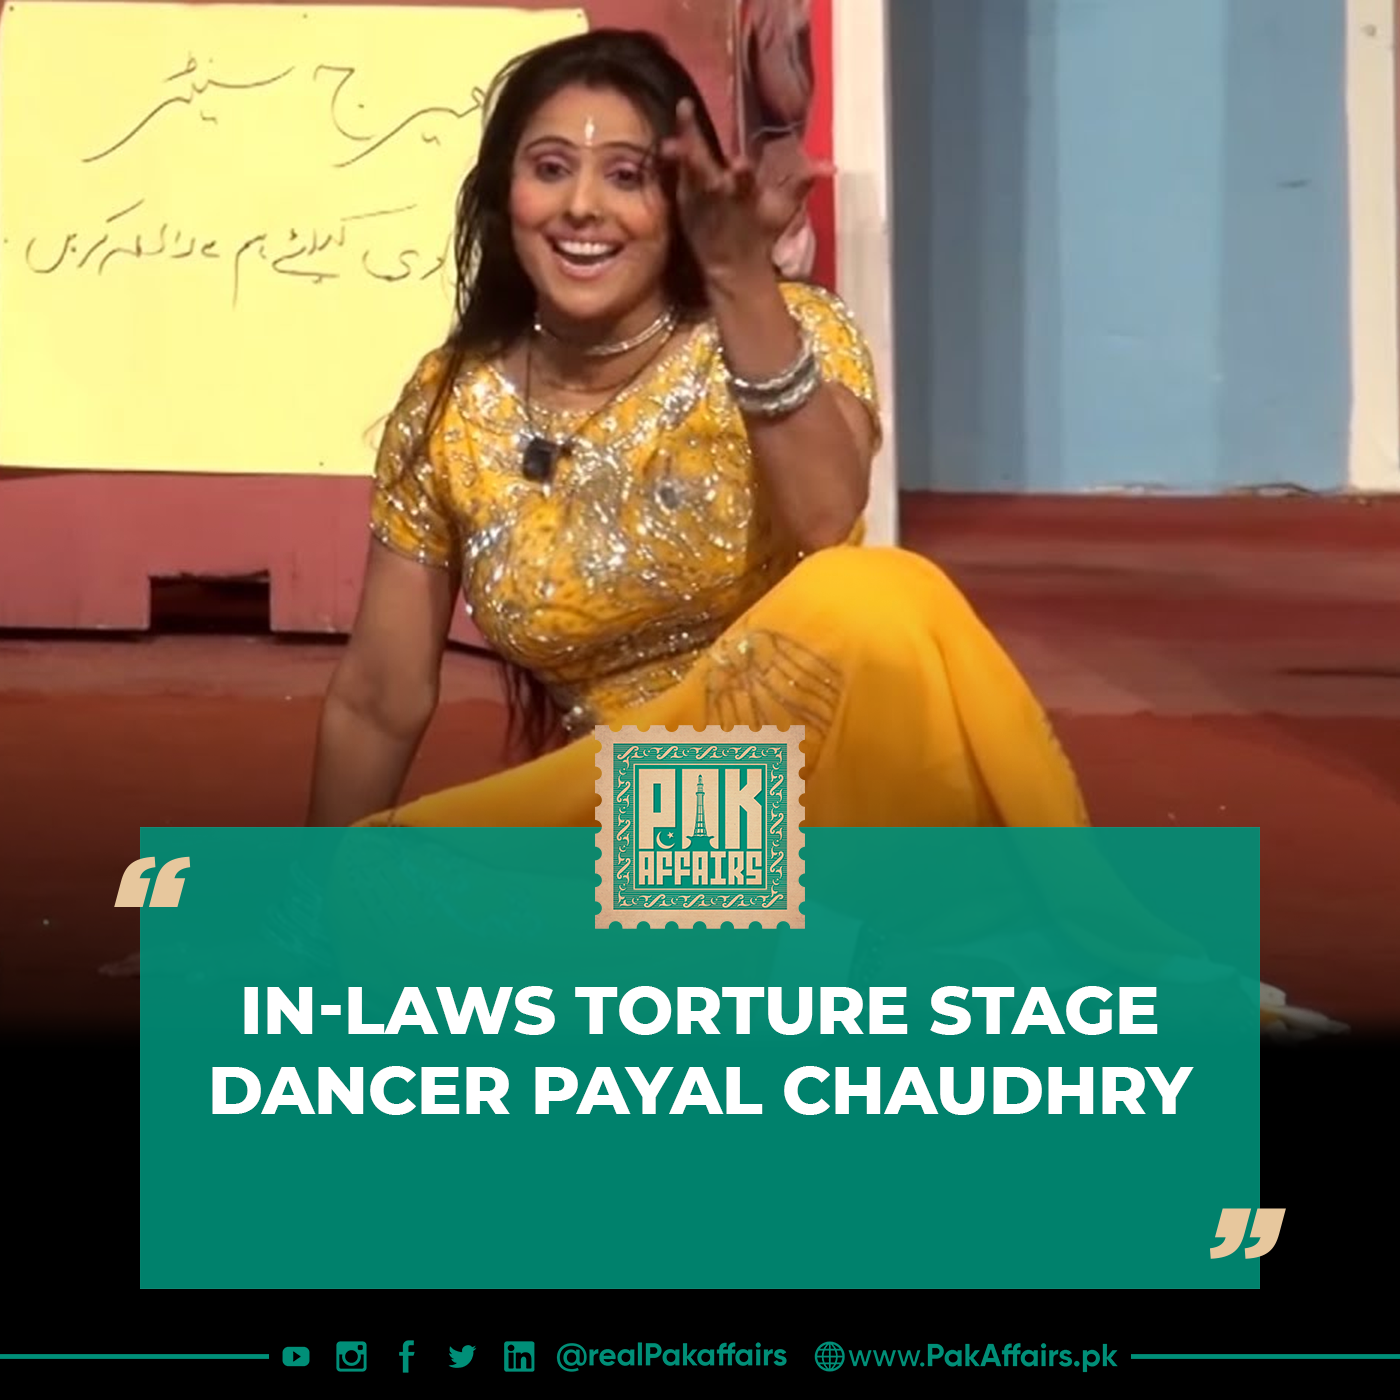 In-laws torture stage dancer Payal Chaudhry